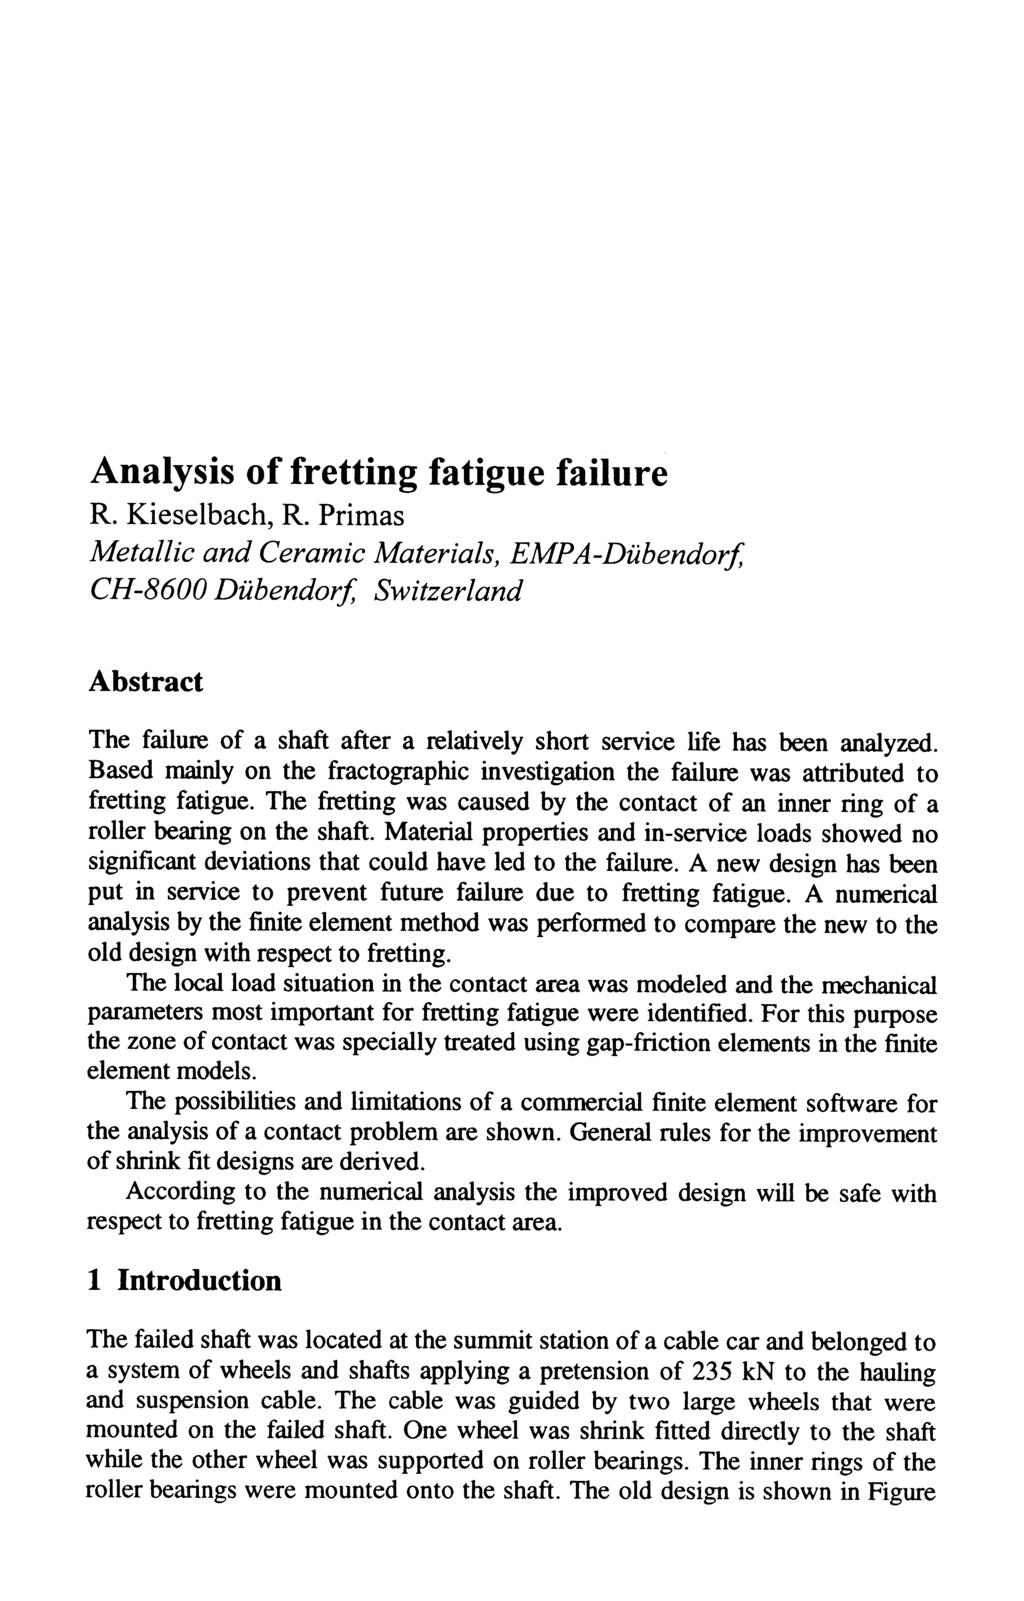 Analysis of fretting fatigue failure R. Kieselbach, R. Primas Metallic and Ceramic Materials, EMPA-Dubendorf, Abstract The failure of a shaft after a relatively short service life has been analyzed.